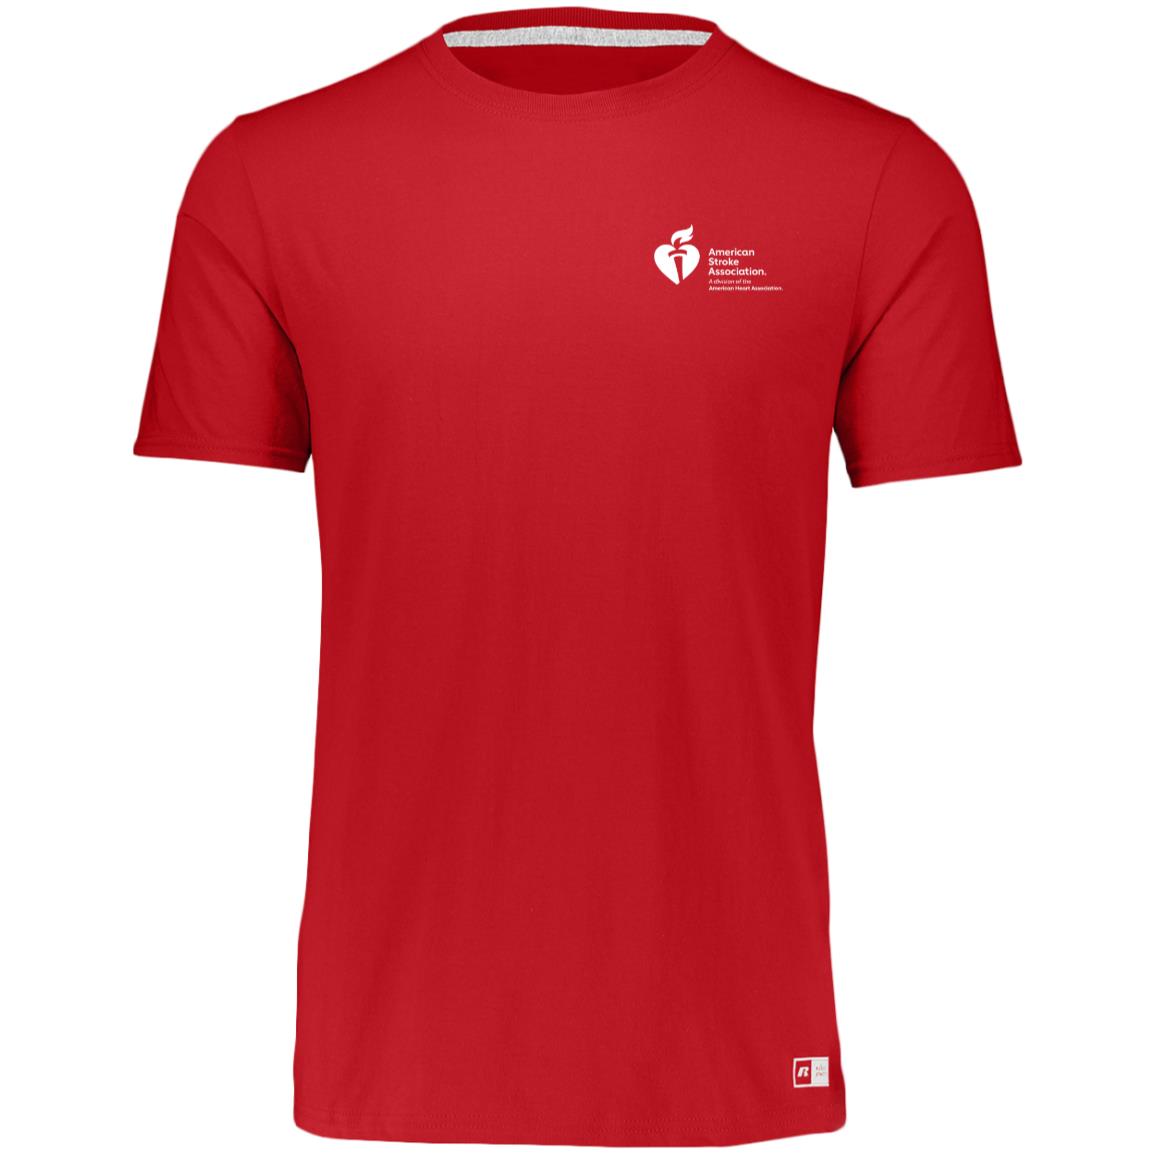 red short sleeve tee with American Stroke Association logo on front chest. Russell Athletic logo seal on bottom hem. crew neck. Unisex.